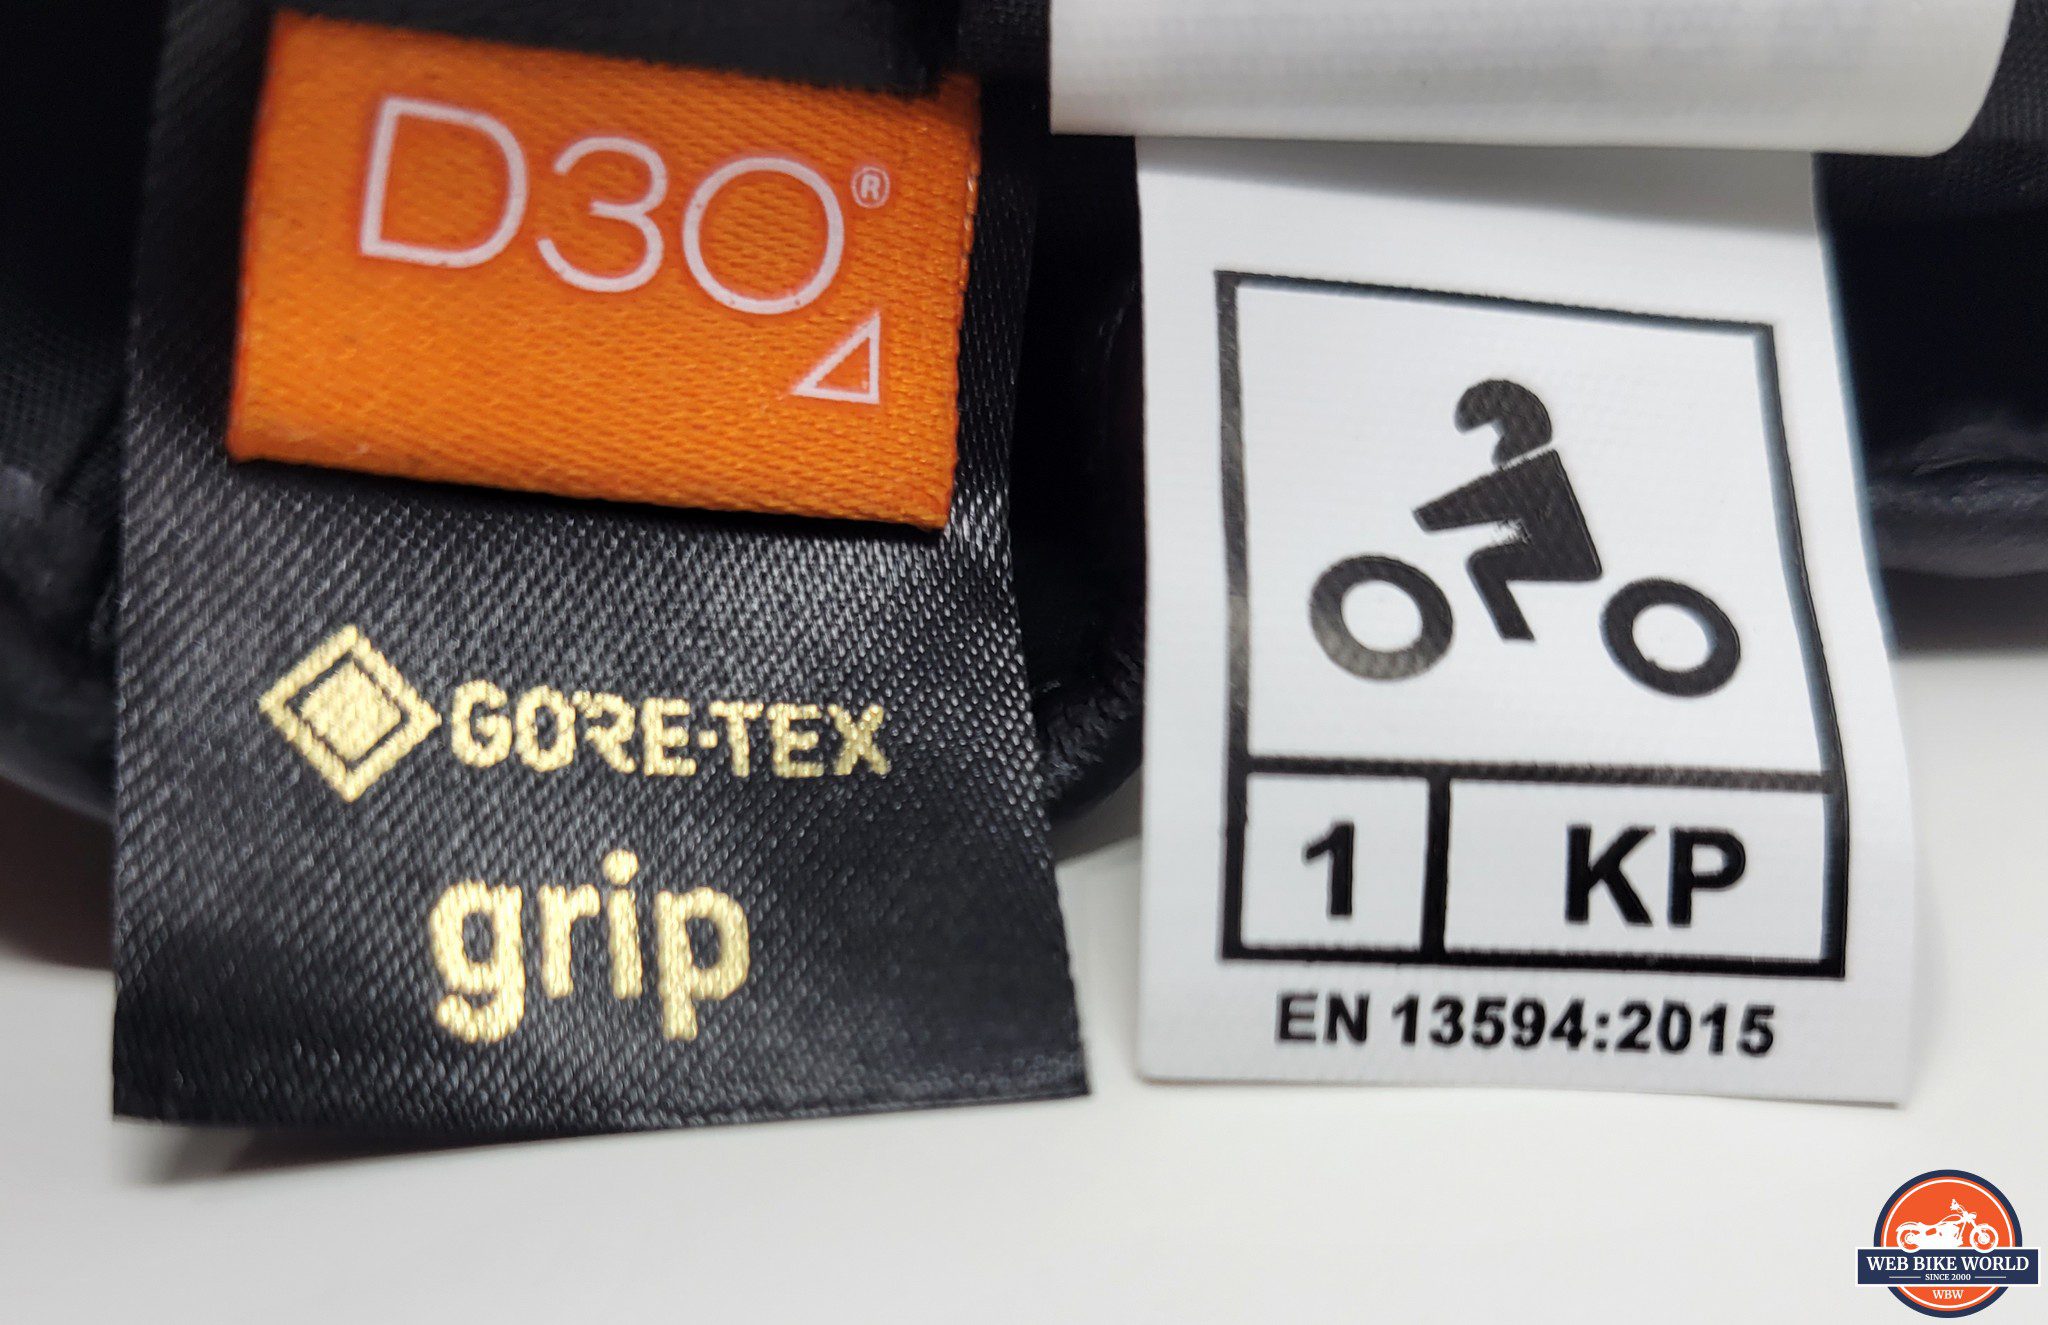 Richa Atlantic GTX glove tags showing Gore-Tex and CE1 certification